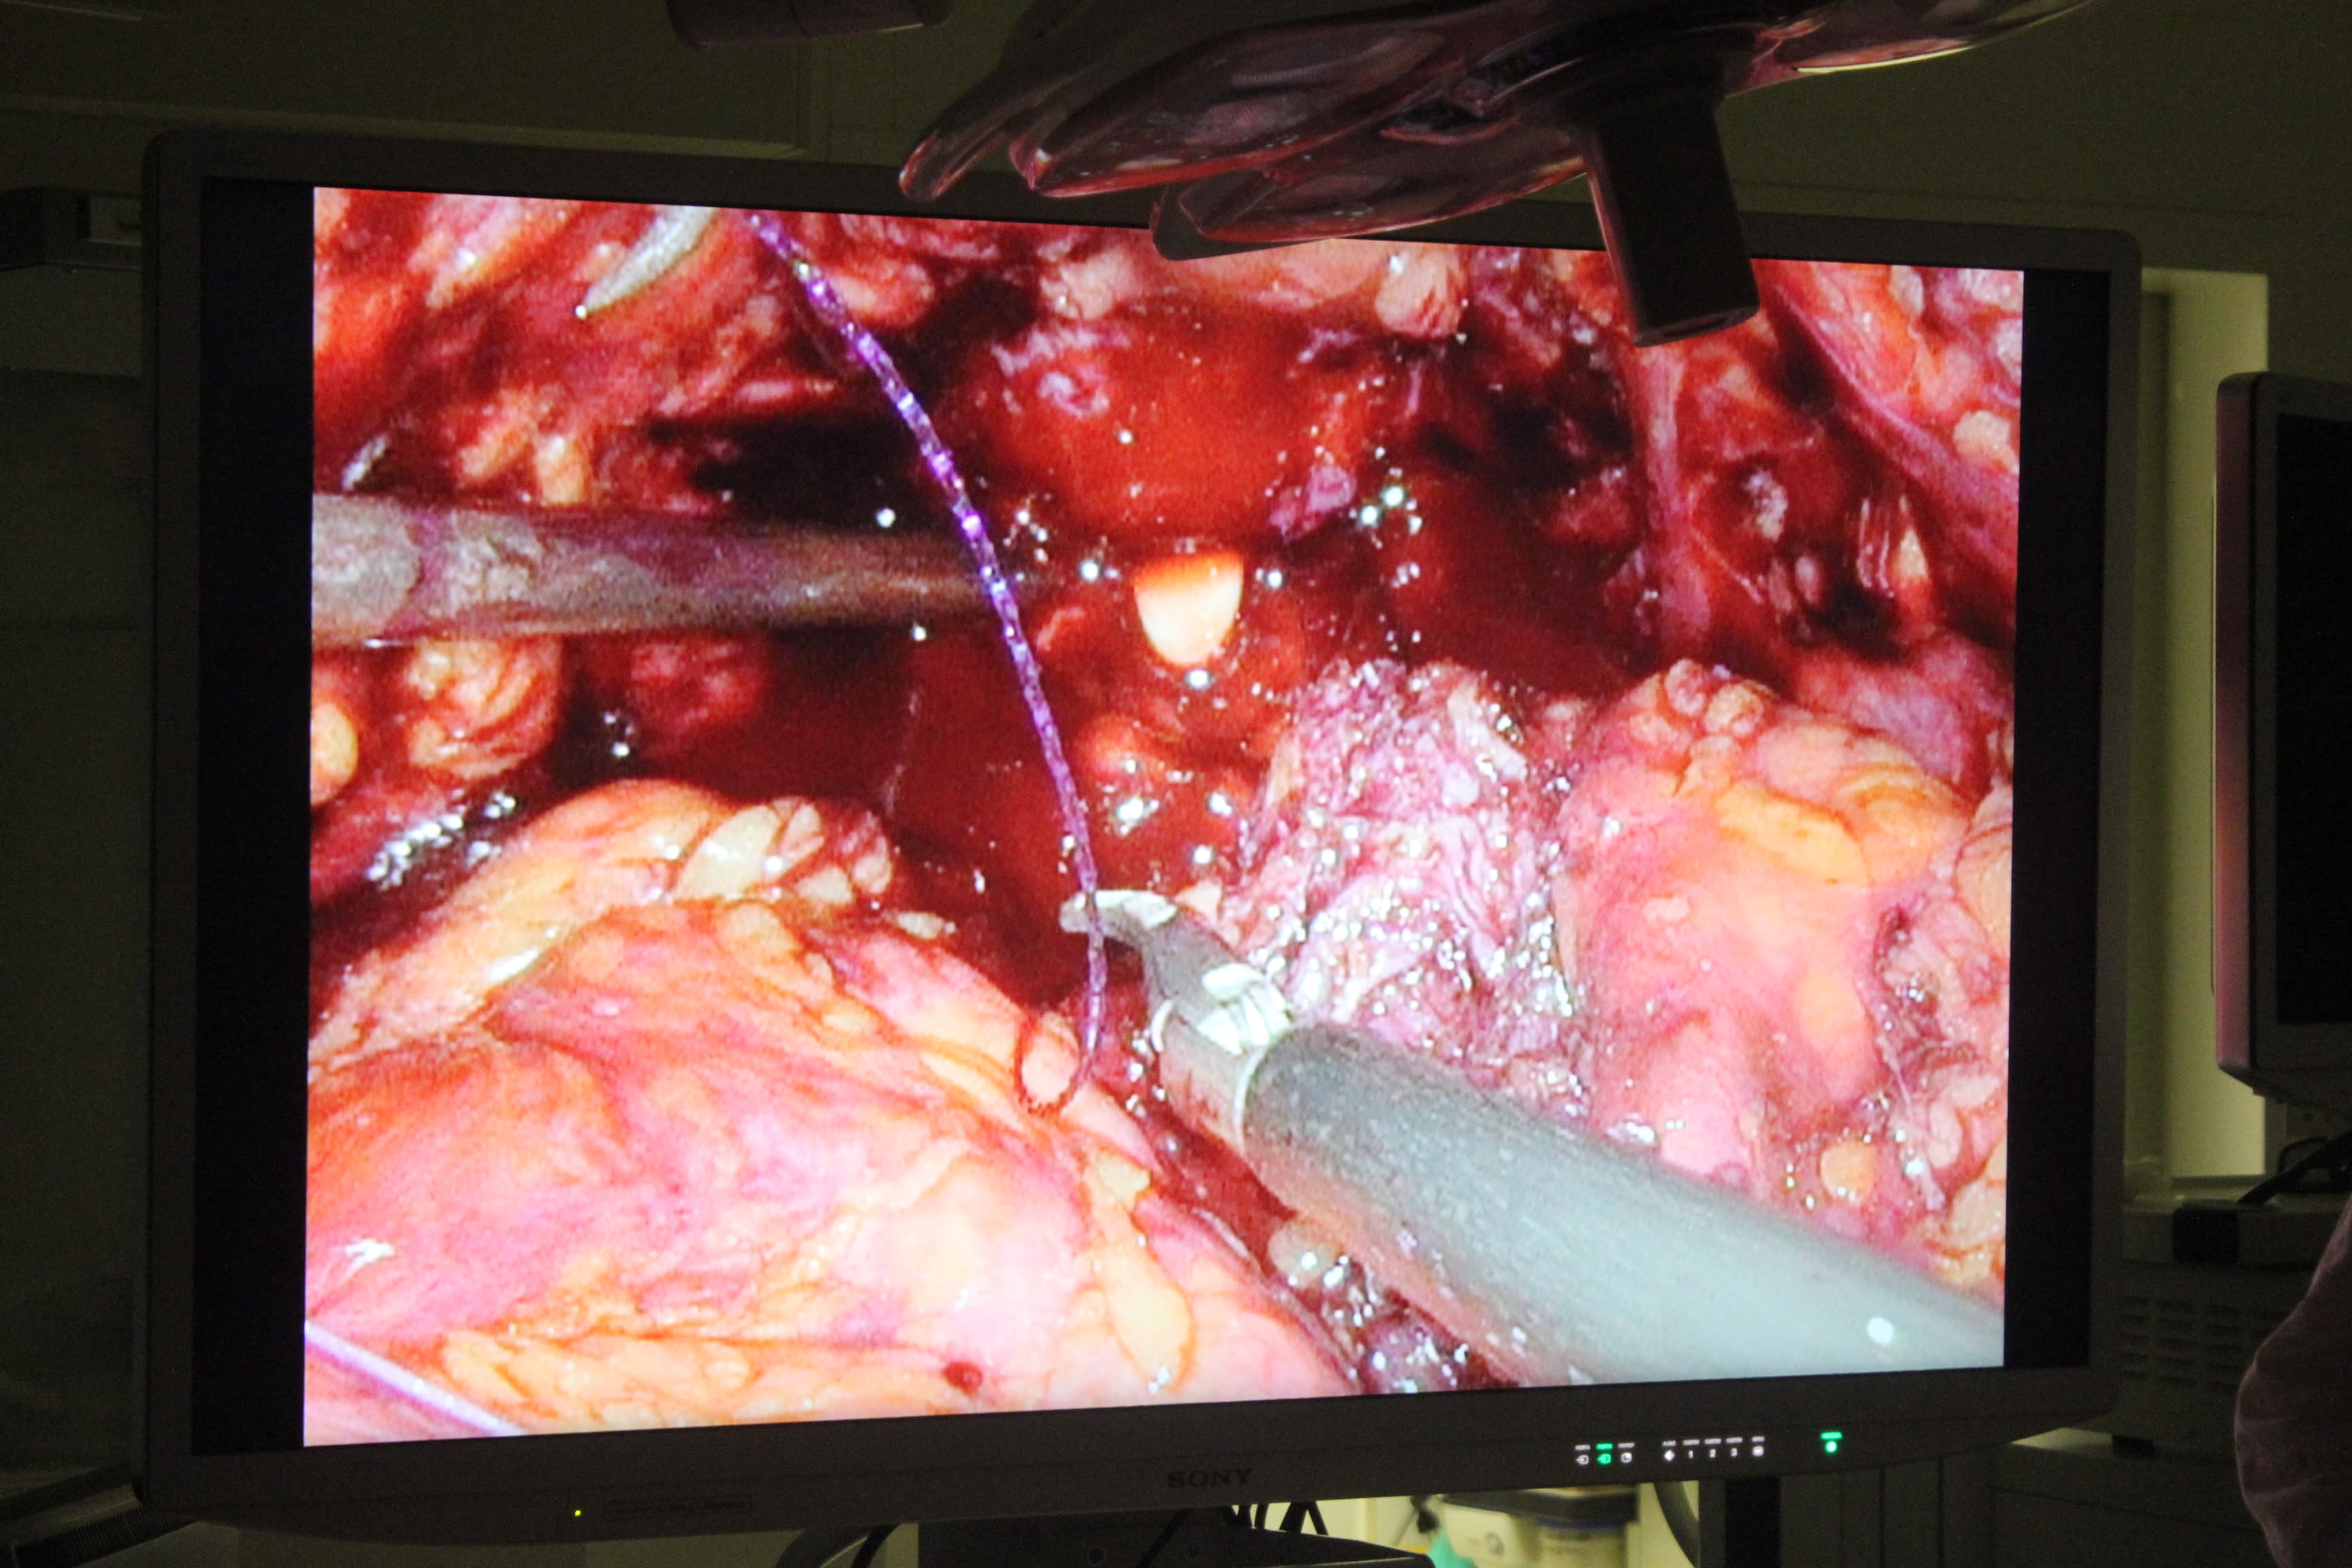 the image from the endoscope